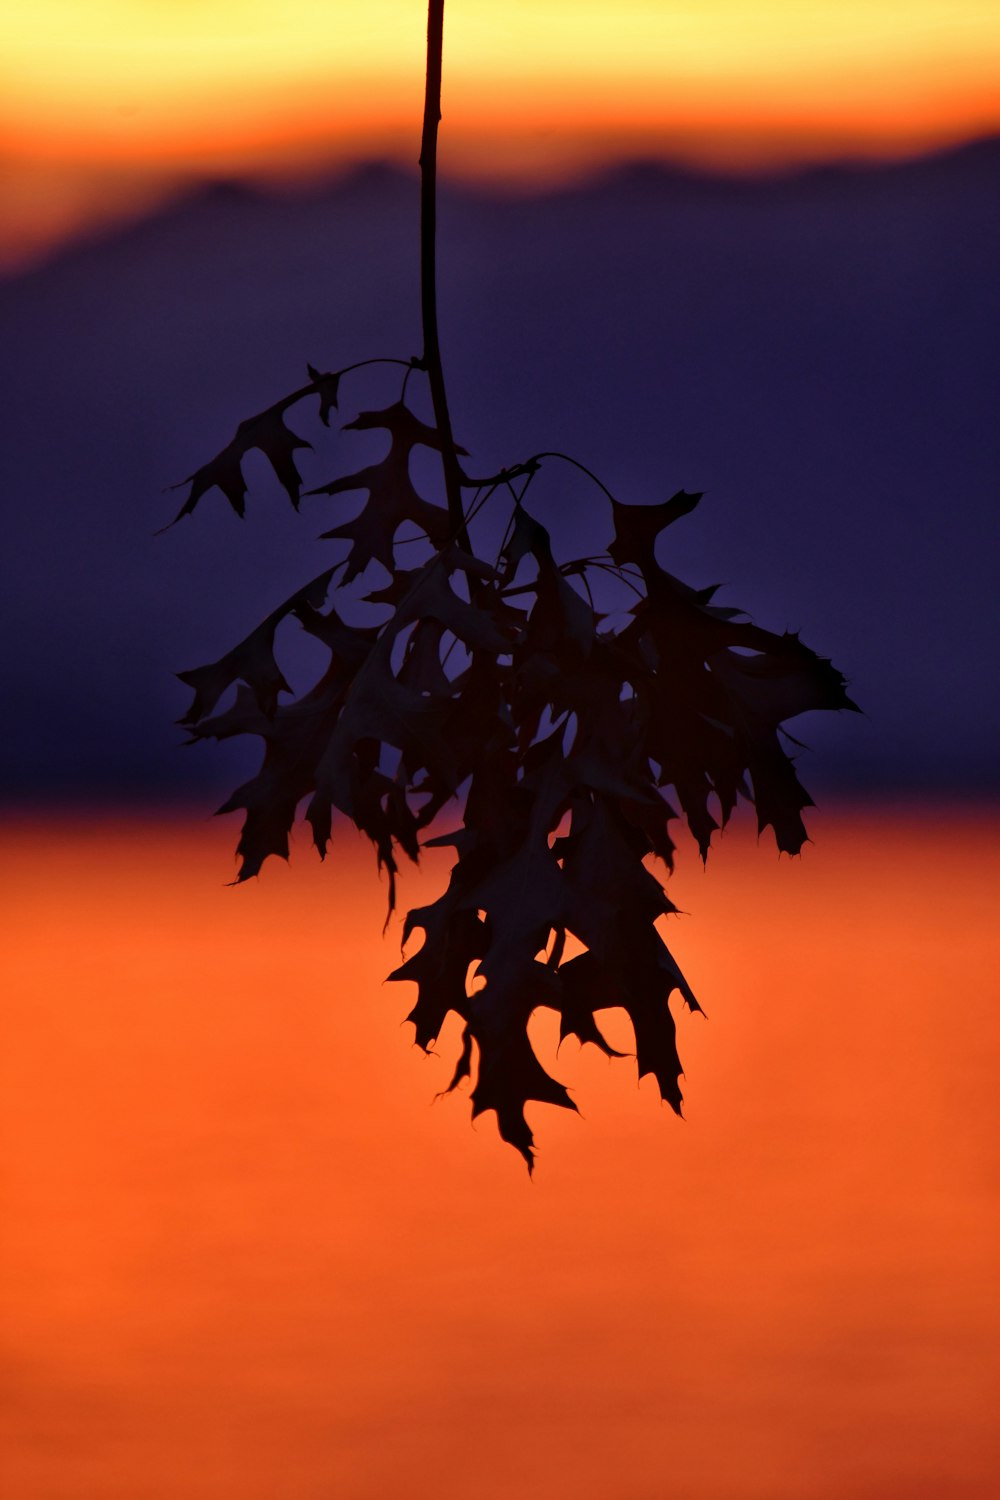 a tree branch with leaves in front of a sunset